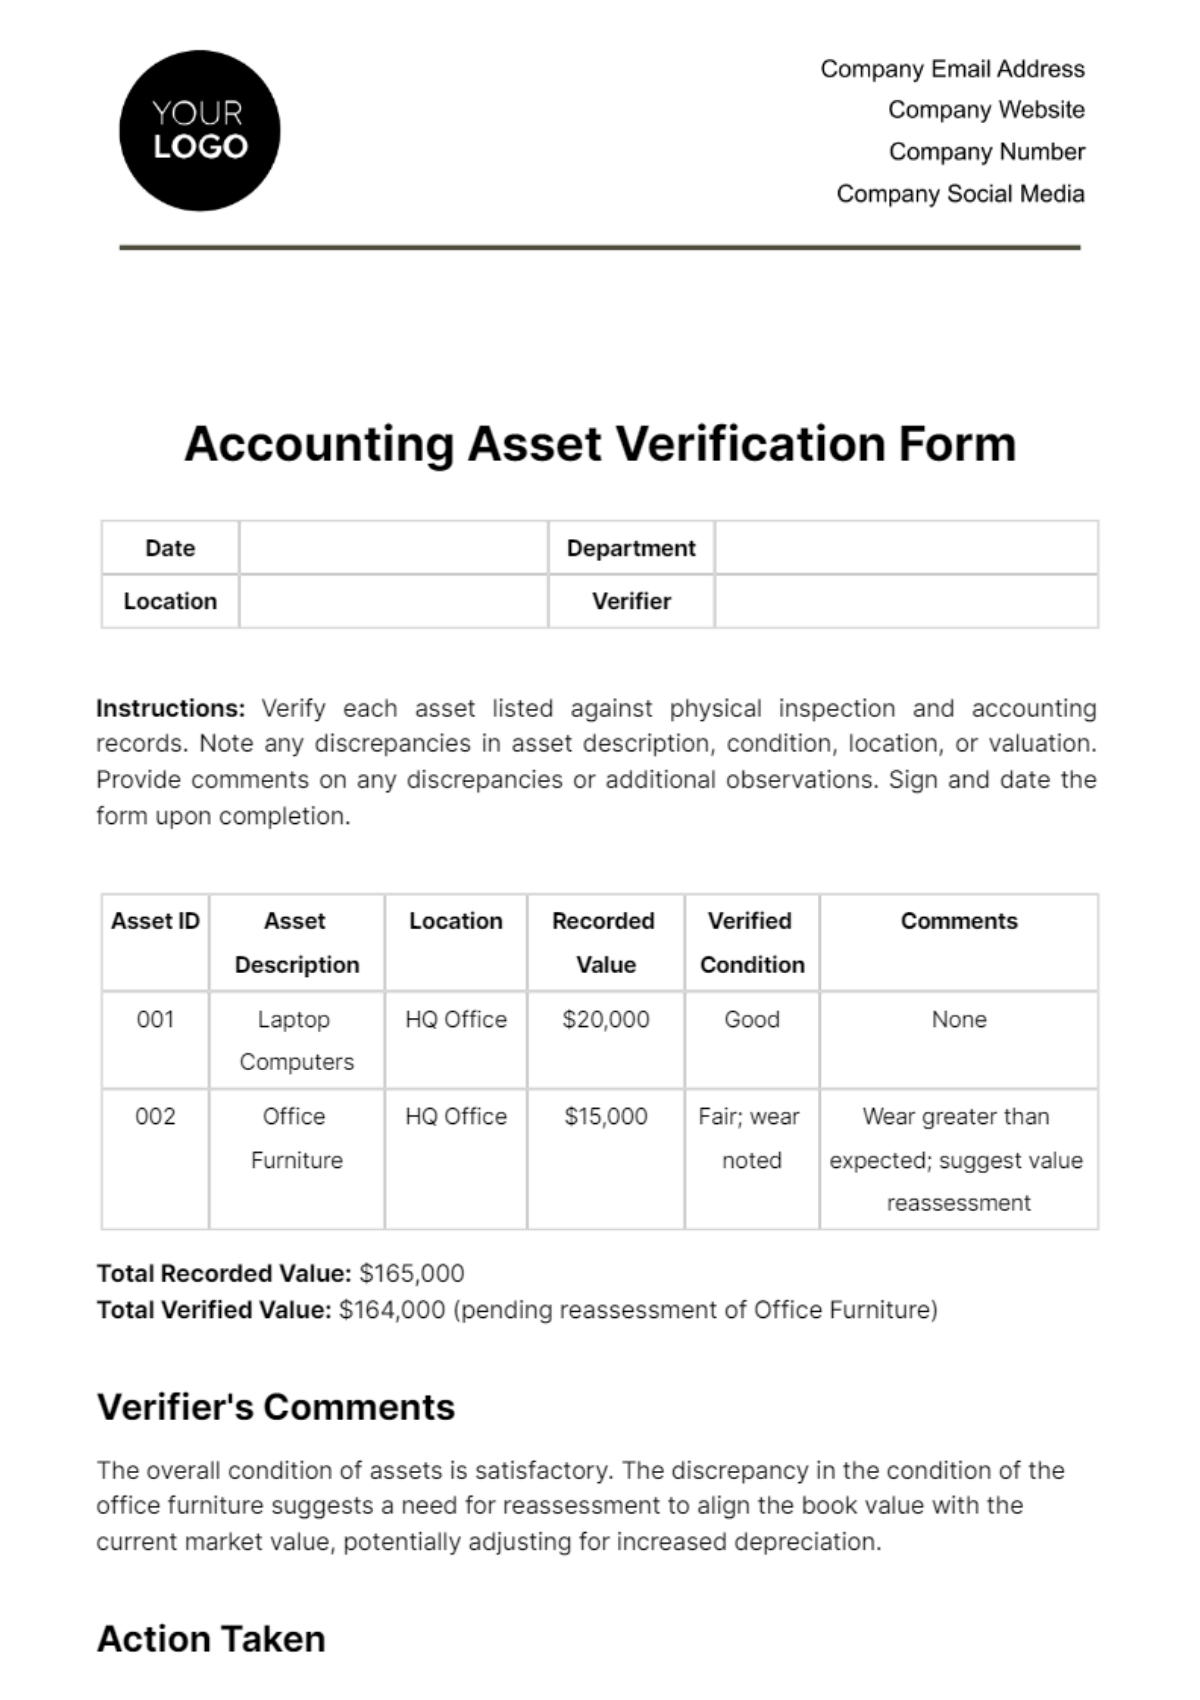 Accounting Asset Verification Form Template